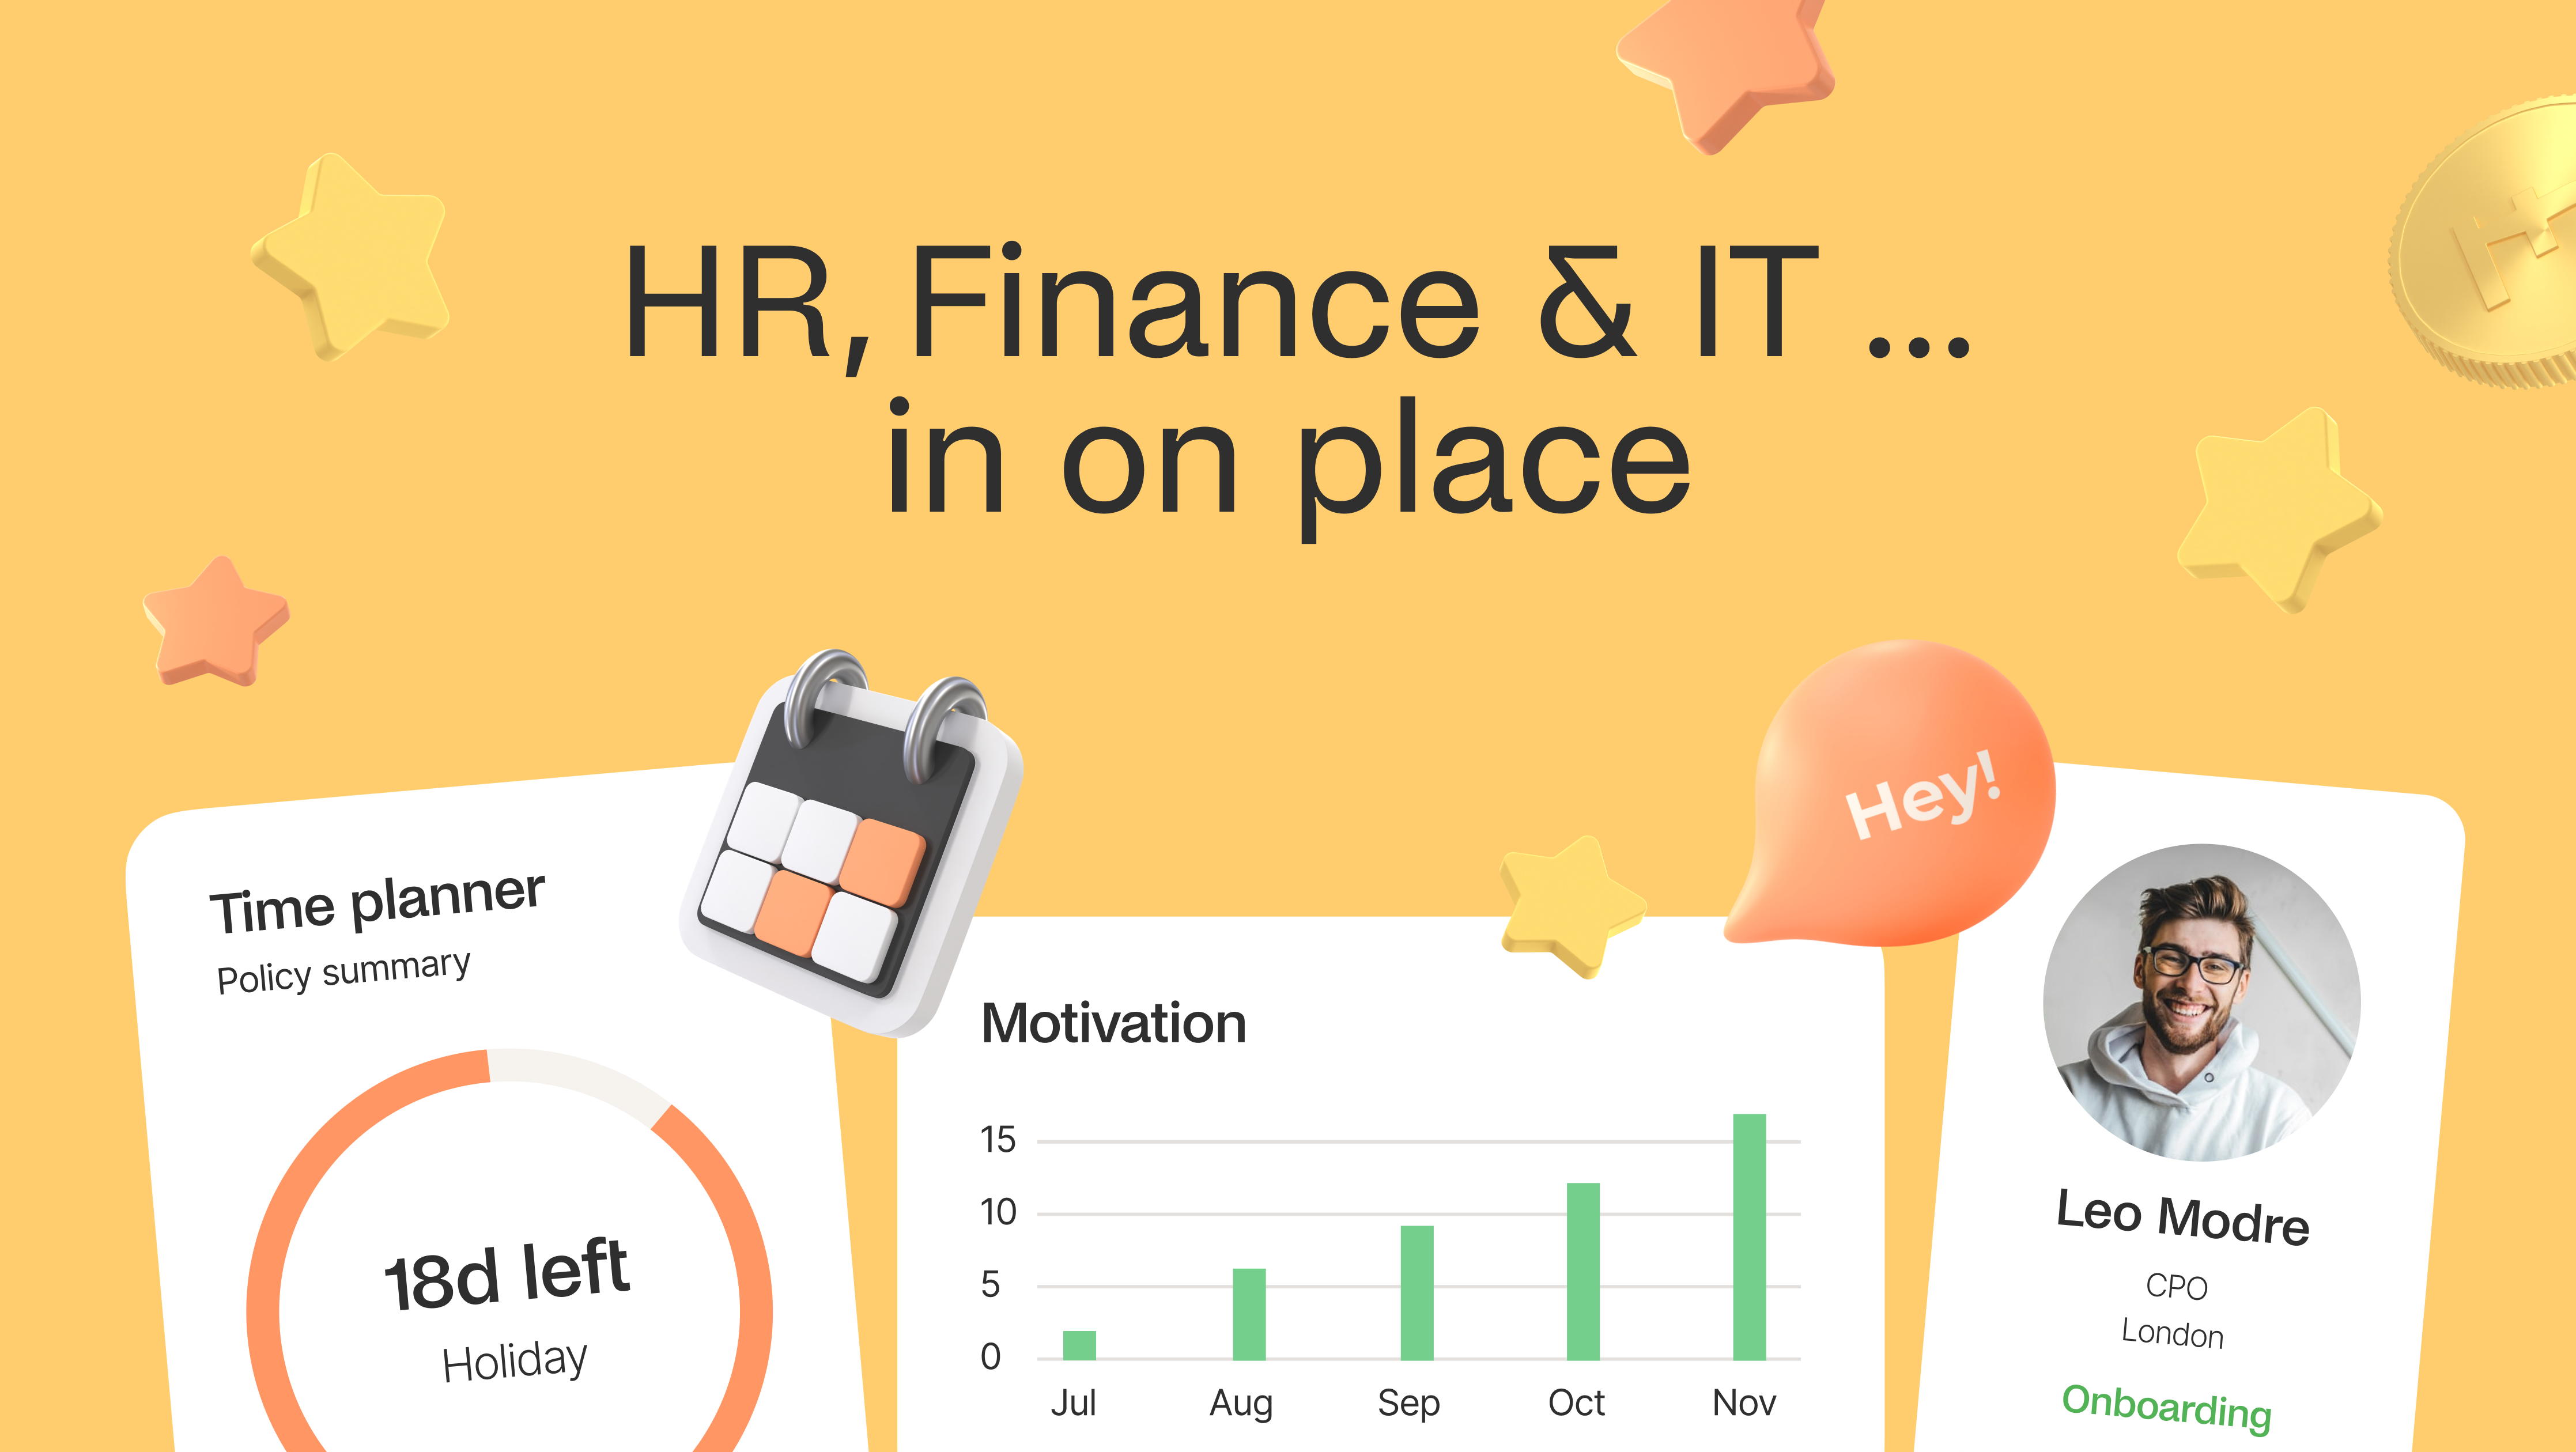 HR, Finance & IT... in one place background image